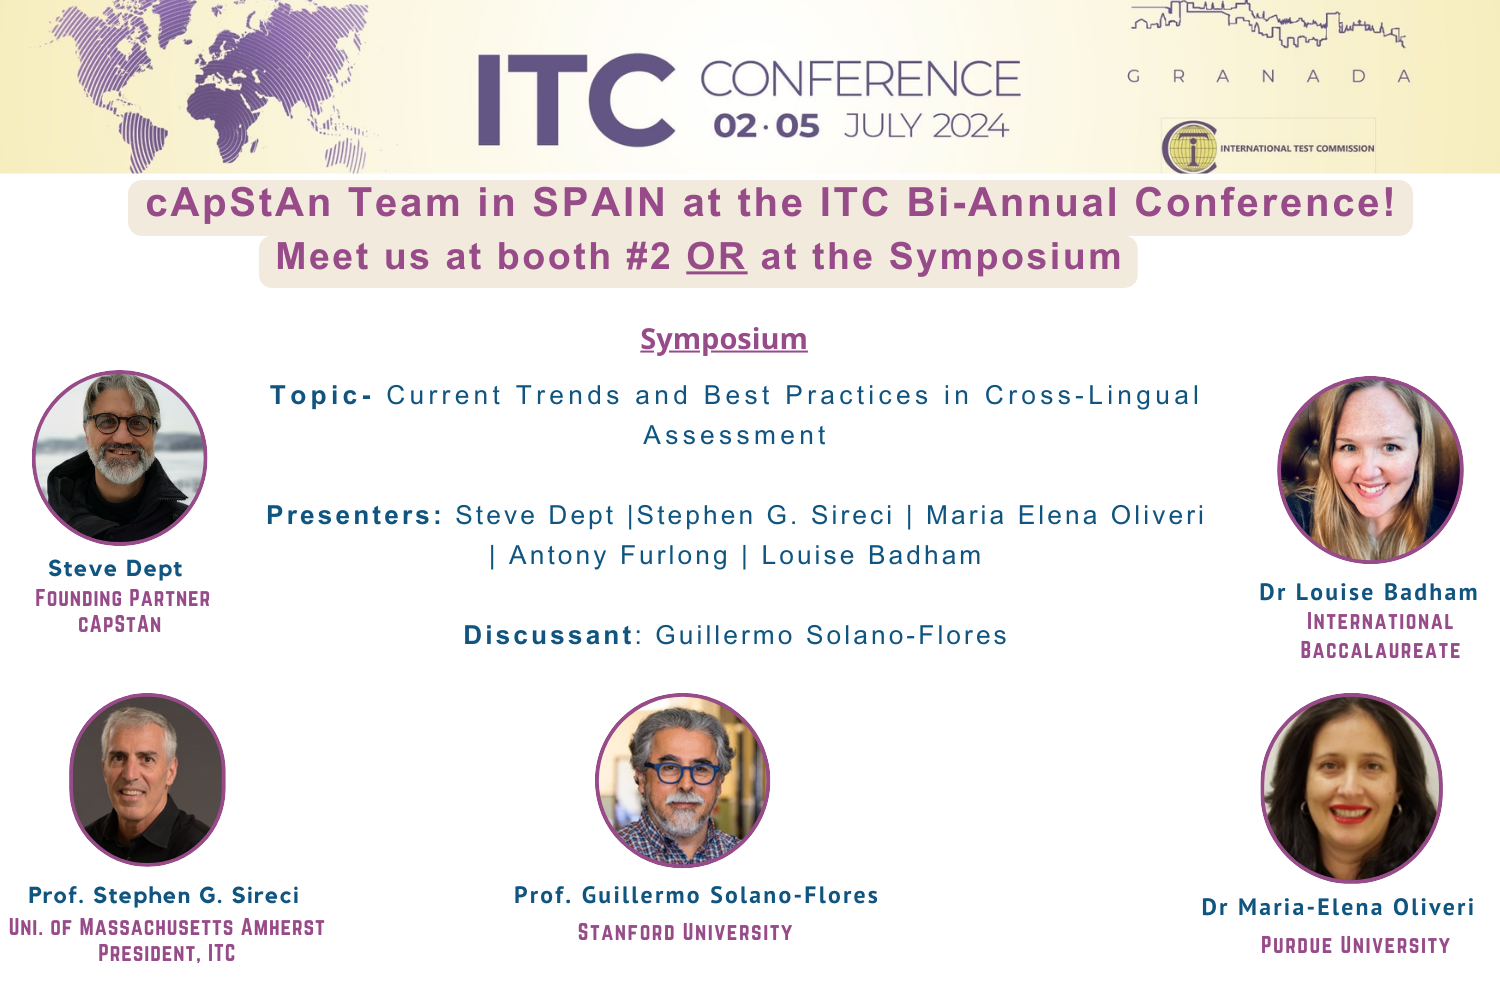 cApStAn at International Test Commission (ITC) Conference 2024, Granada, Spain, July, 2024